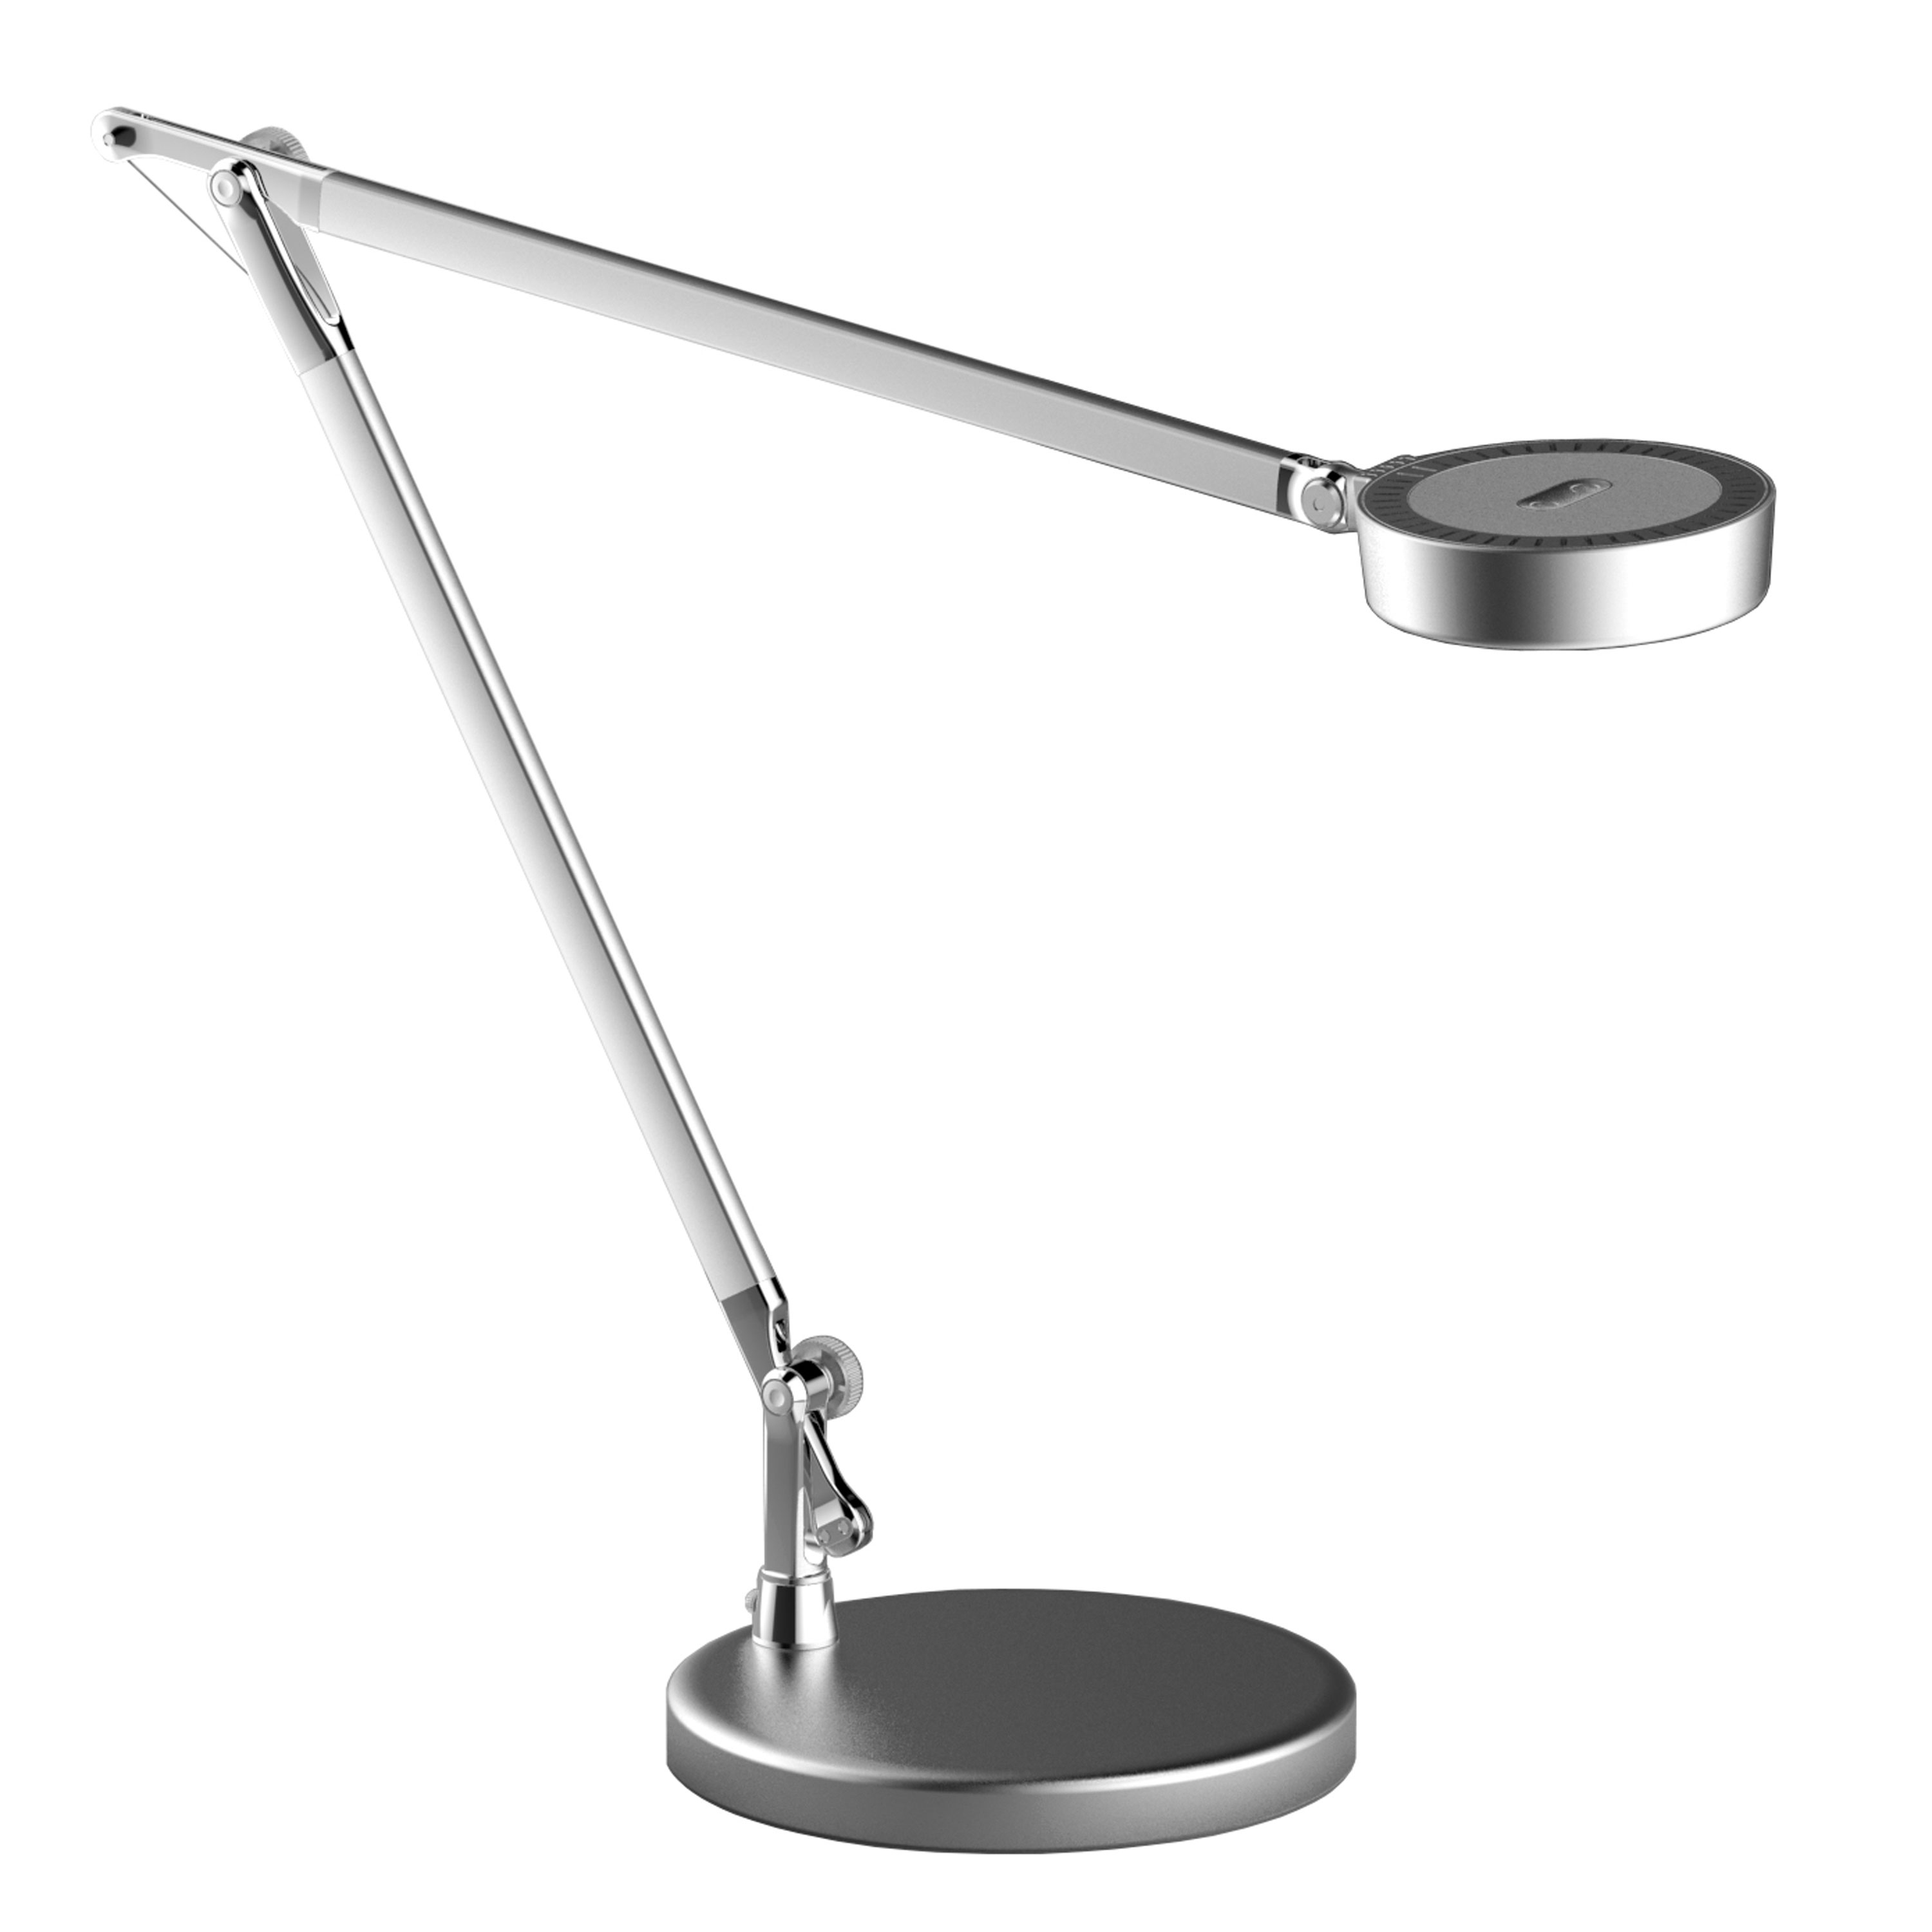 Available in a variety of configurations, the LED Desk Lamp collection blends practical features with an artful contemporary aesthetic. The design features an integrated LED light. LED fixtures produce light at up to 90 percent better efficiency than incandescent lighting. The sturdy plastic or metal base in a choice of finishes holds a rod that may be stationary or articulated and adjustable, depending on the model. Some models including color changing tech and wireless charging features, with a magnifier available in one configuration. You'll read, study or work with directional illumination and in elegant style with an LED Desk Lamp.